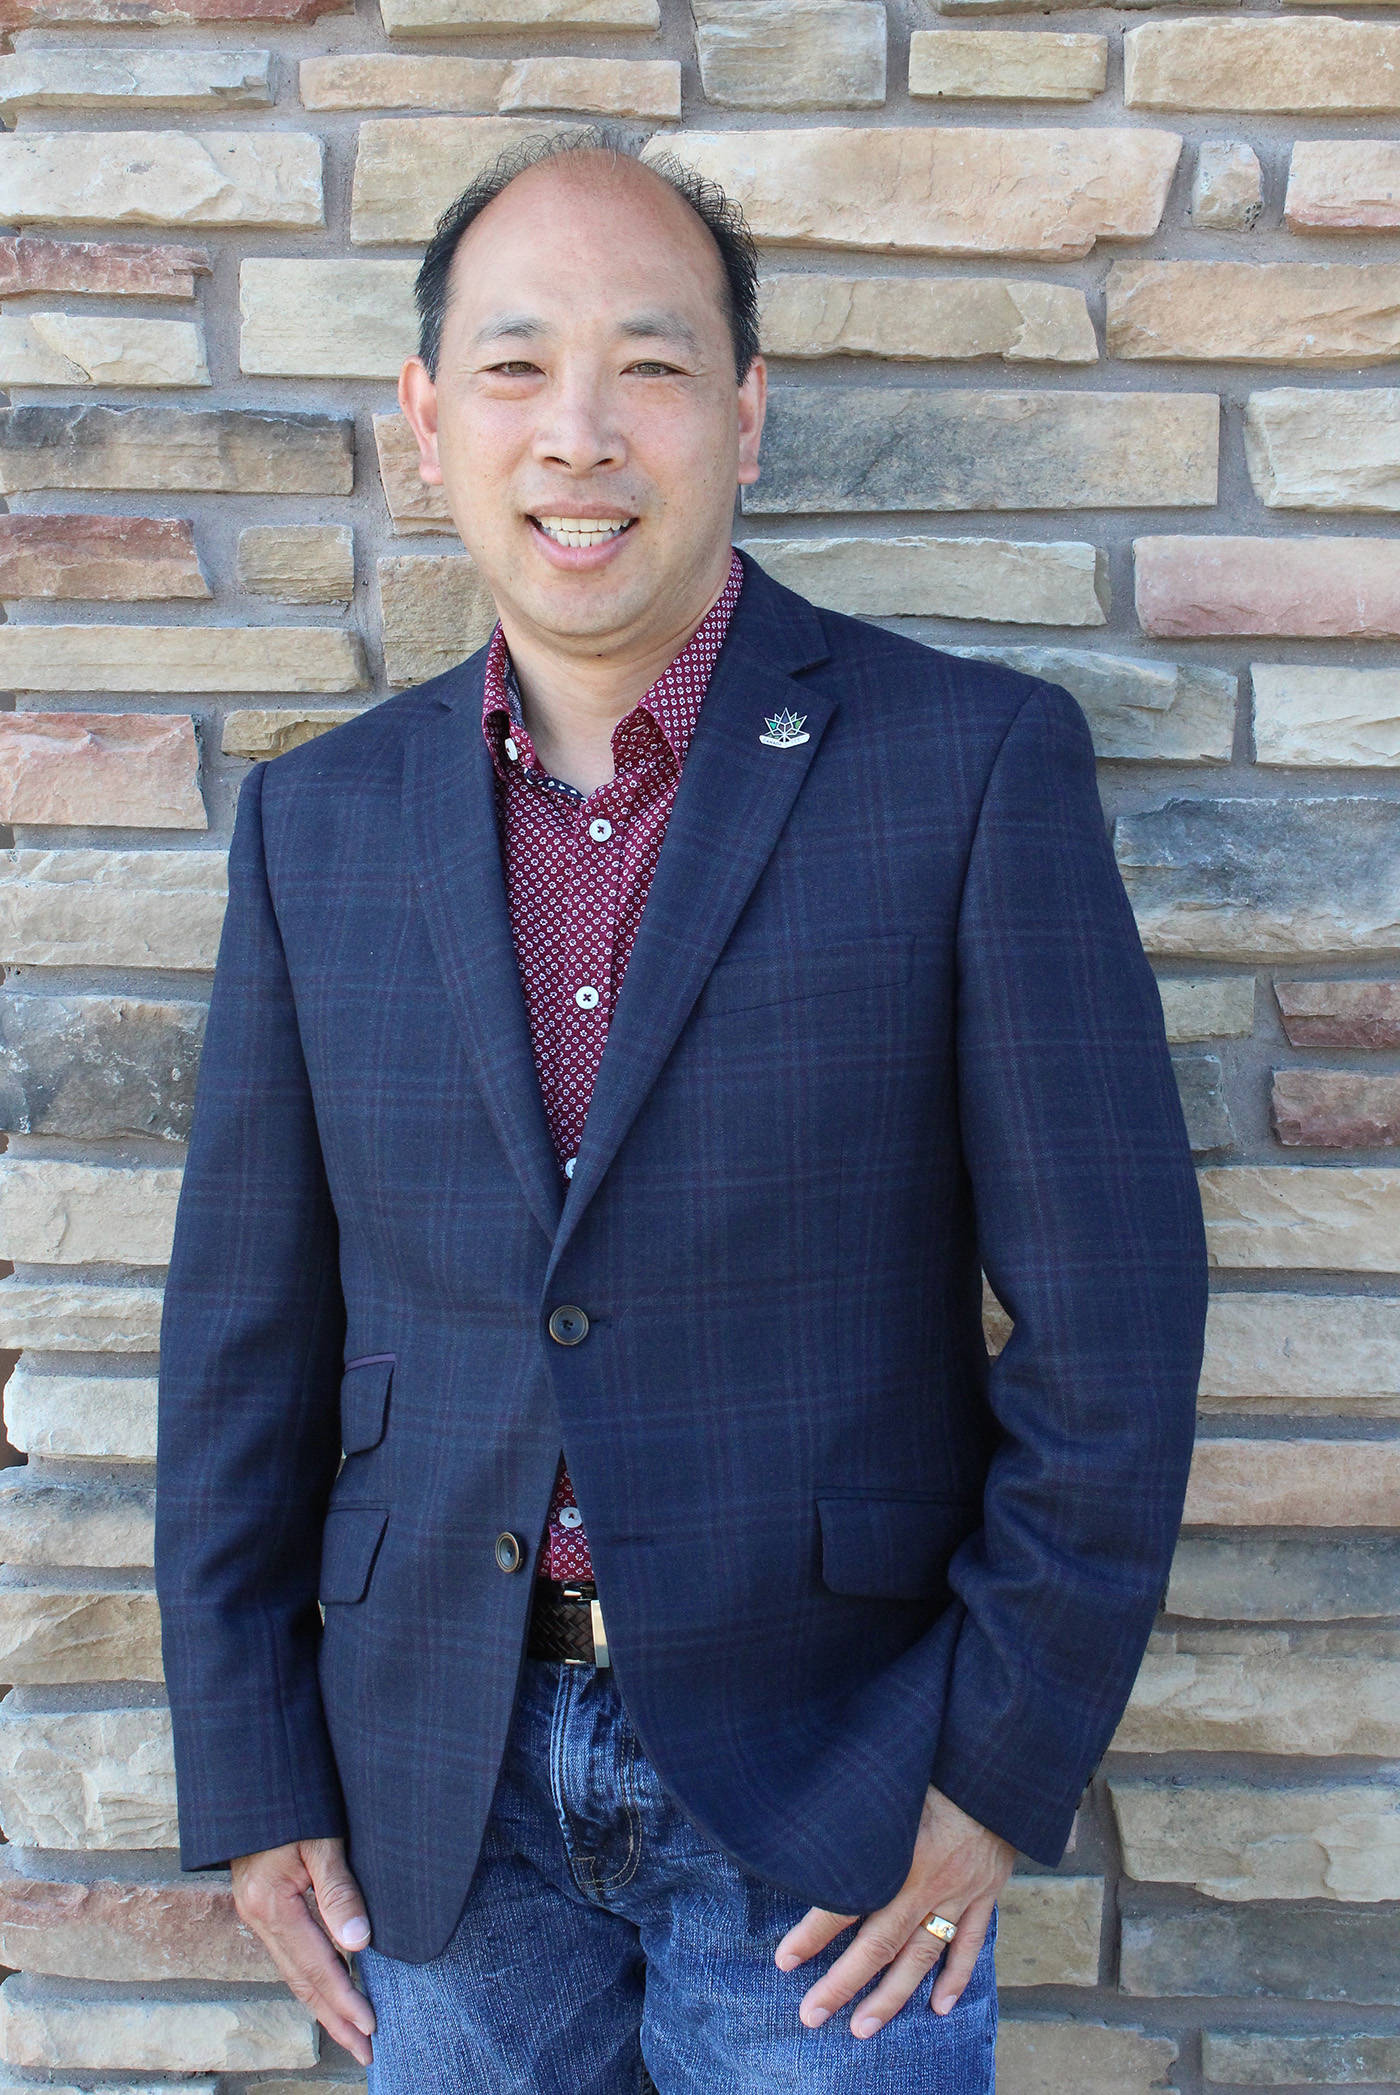 Red Deer City Council incumbent Lawrence Lee seeks re-election